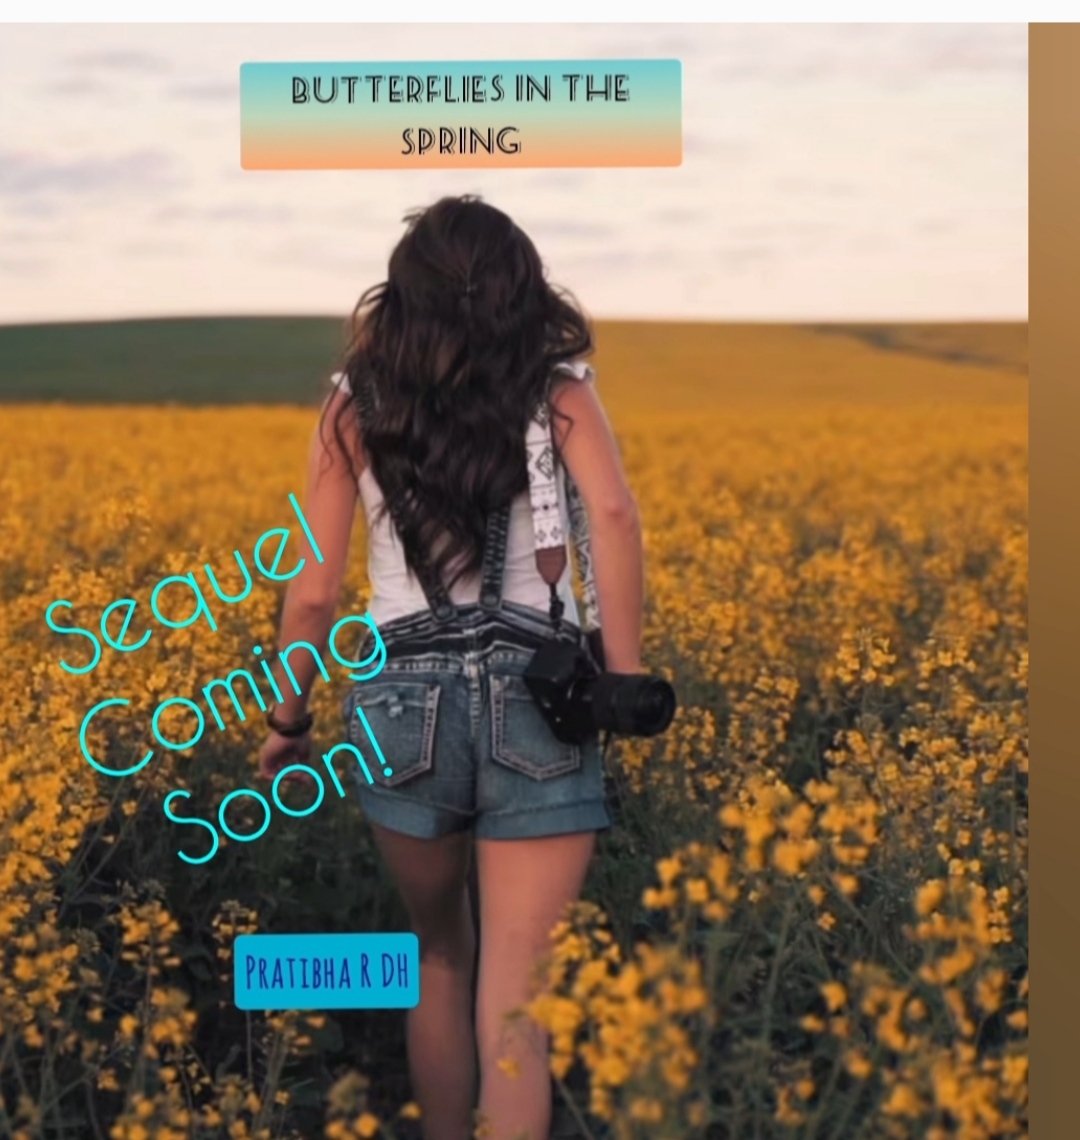 Butterflies in the Spring - sequel to 'Butterflies in the storm, 'is coming soon...

#butterfliesinthestorm #contemporaryromancereads #mysterybook #thrillerbooksaddict #bestsellernovel